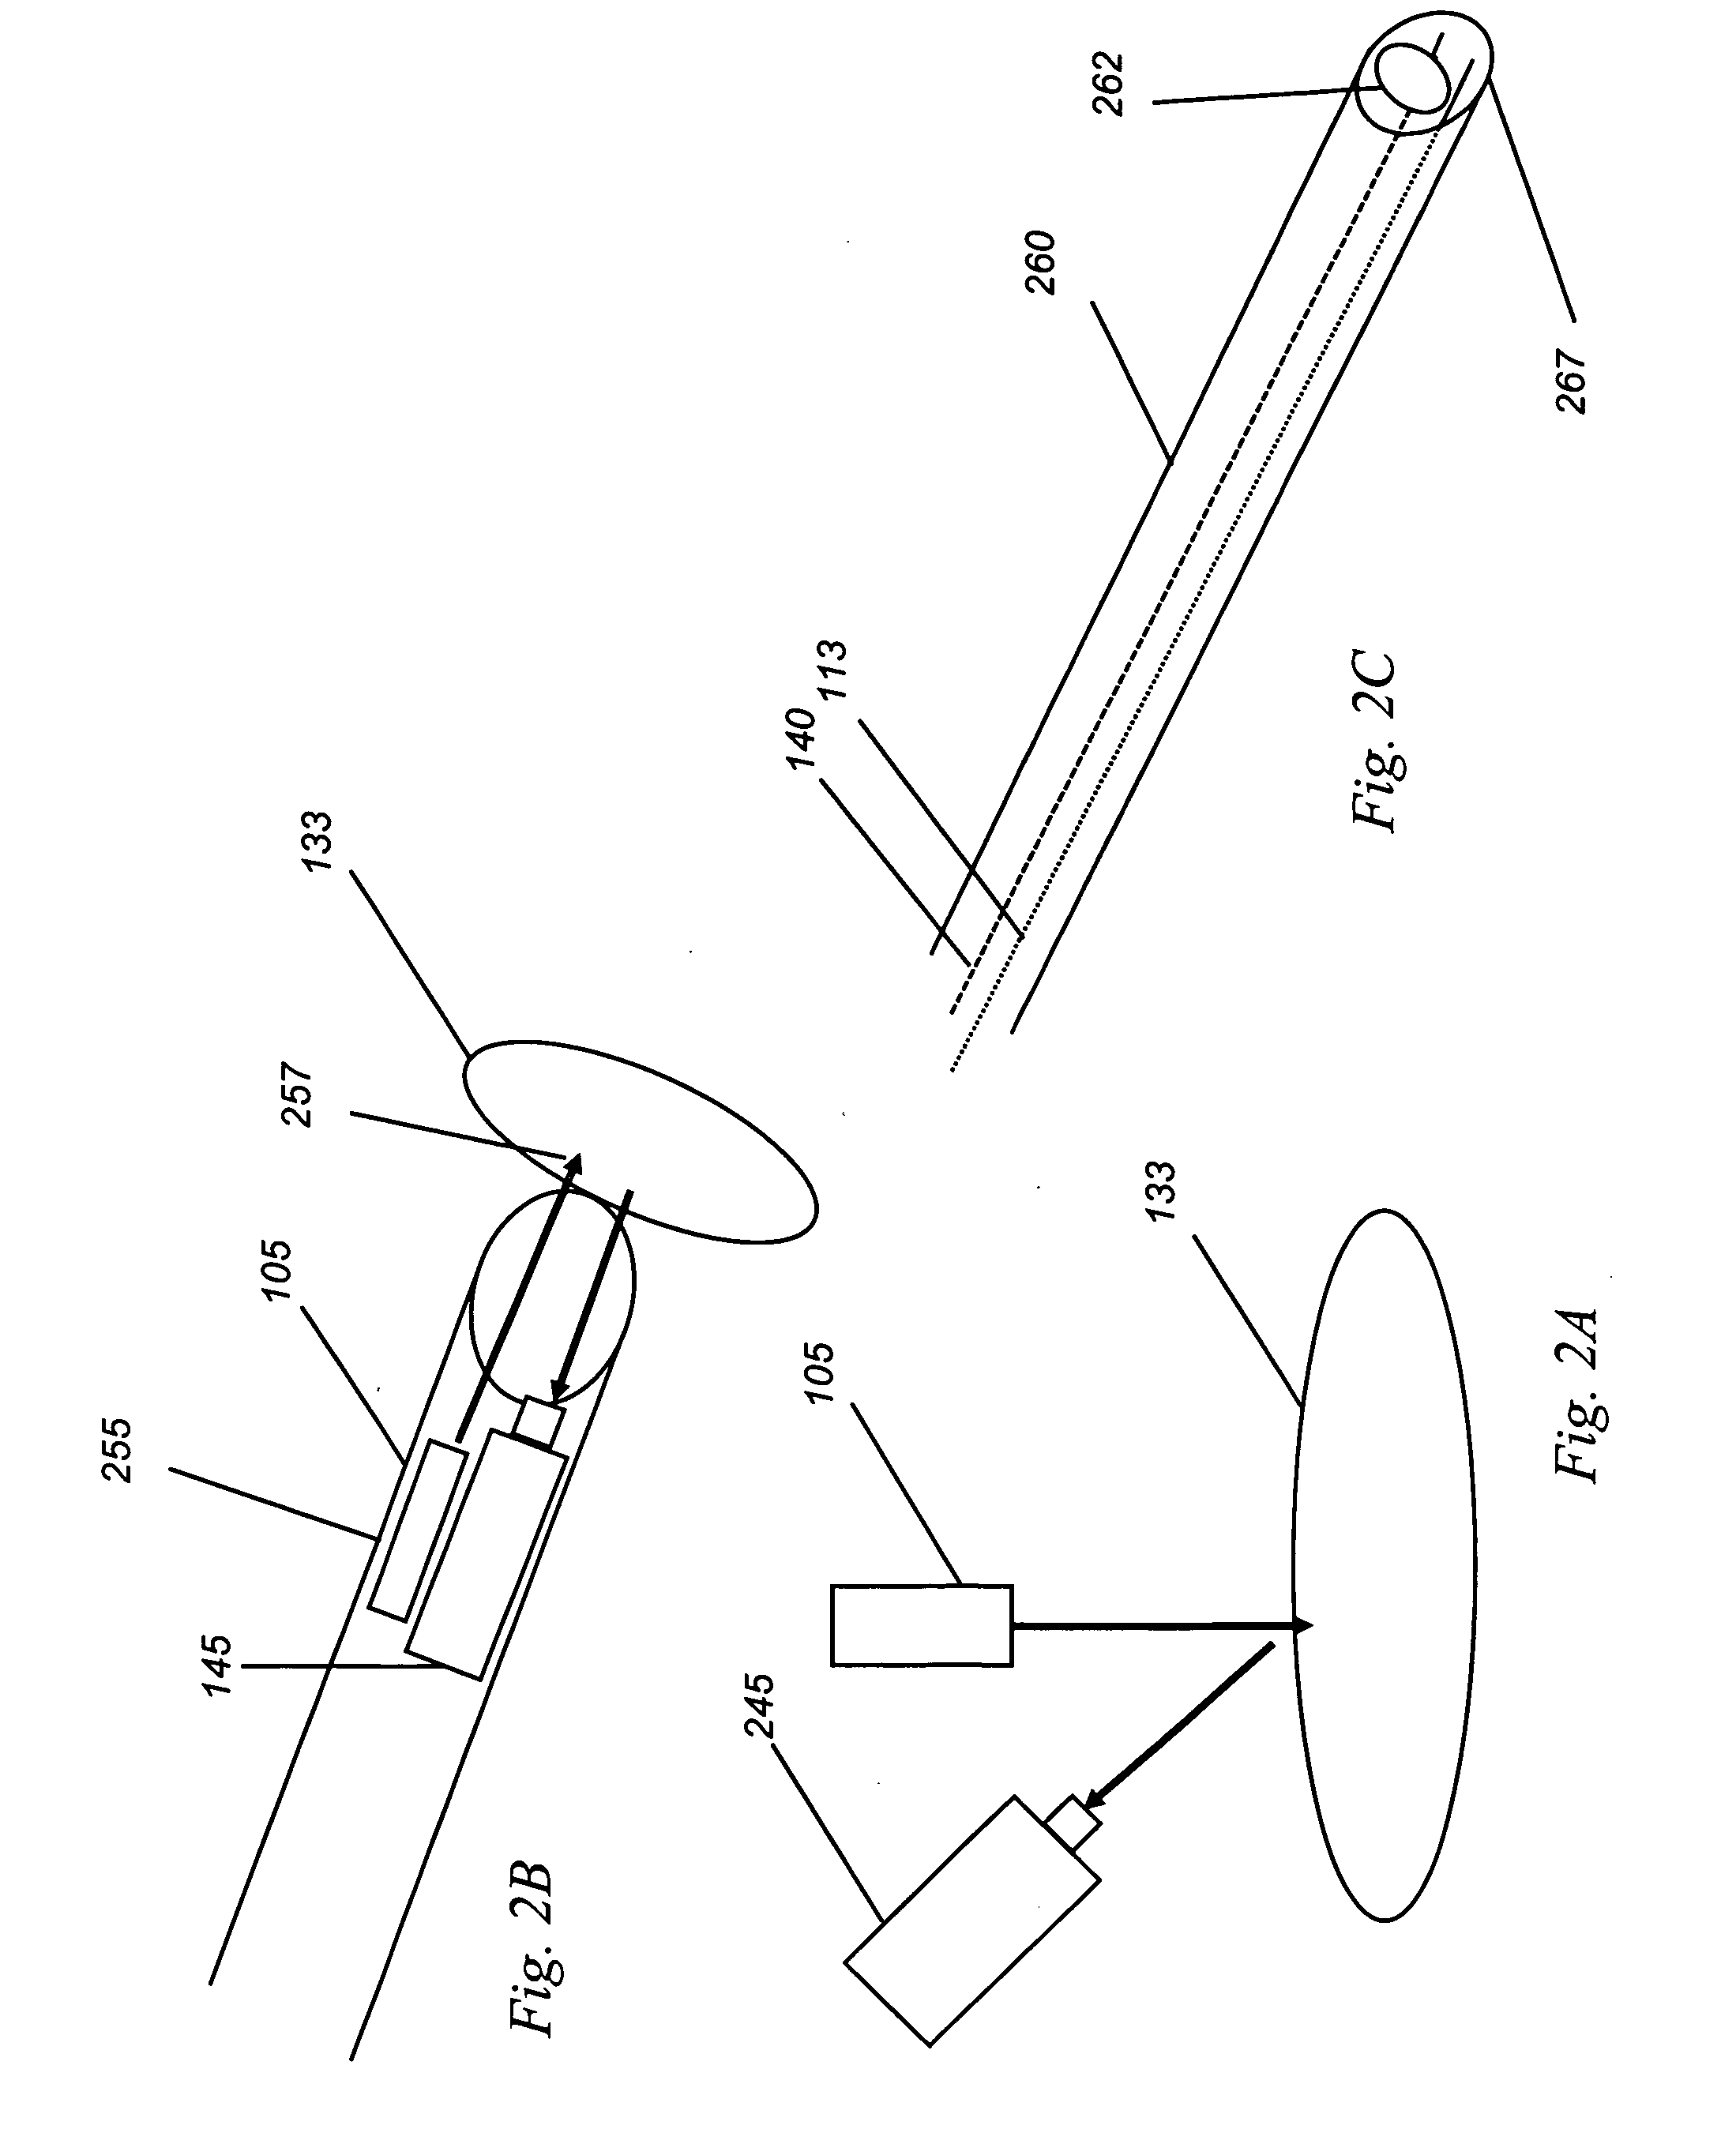 Medical imaging lens system, and method with high-efficiency light collection and collinear illumination